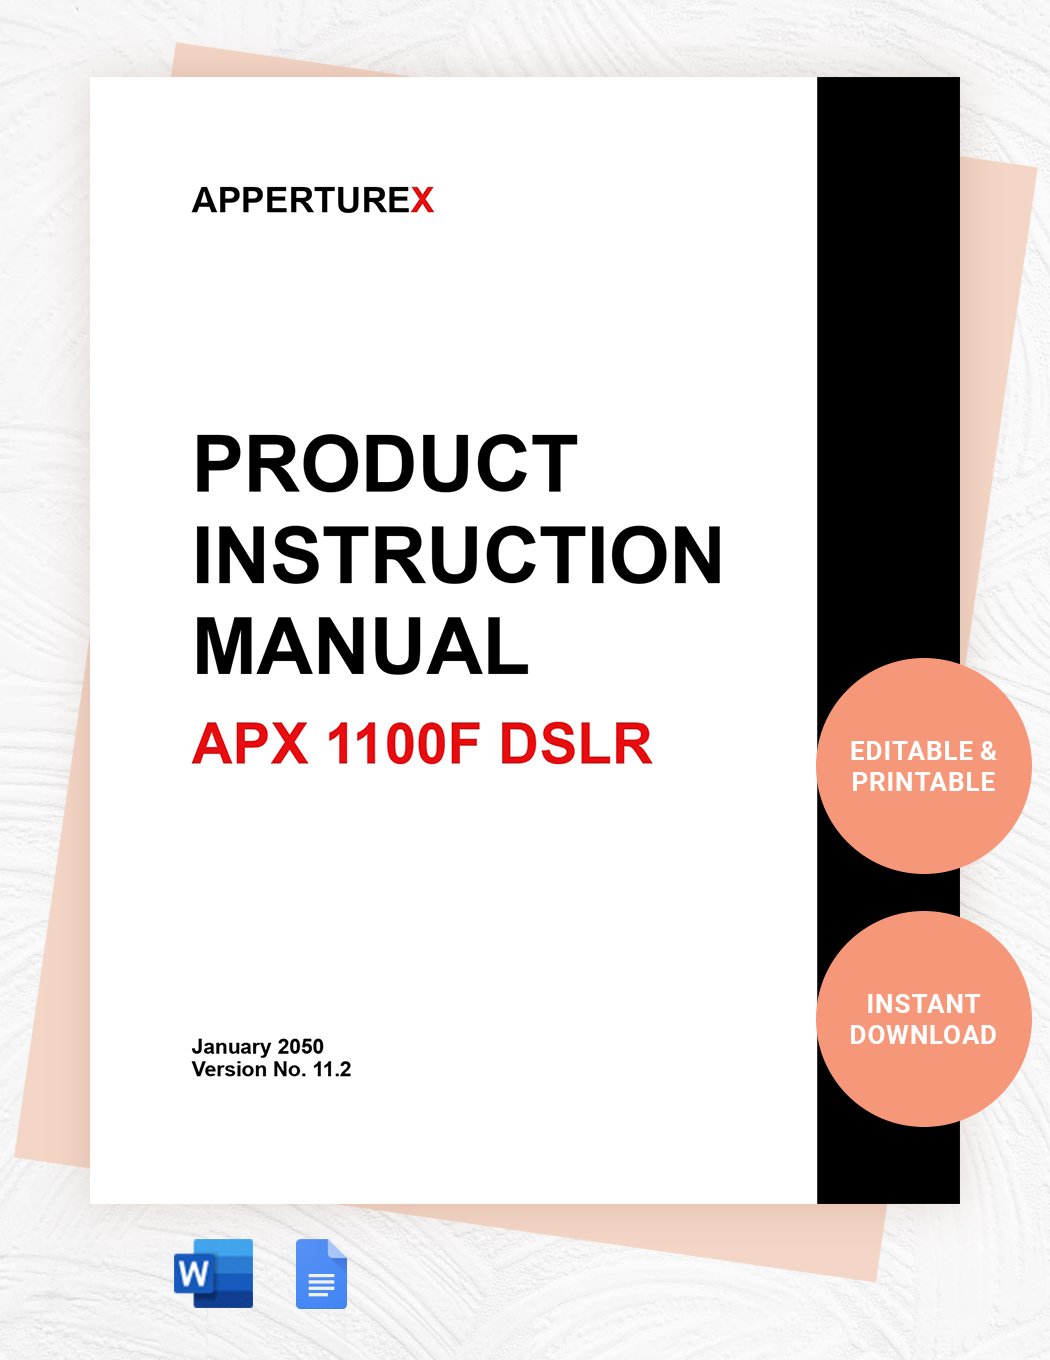 Product Instruction Manual Template Download in Word, Google Docs